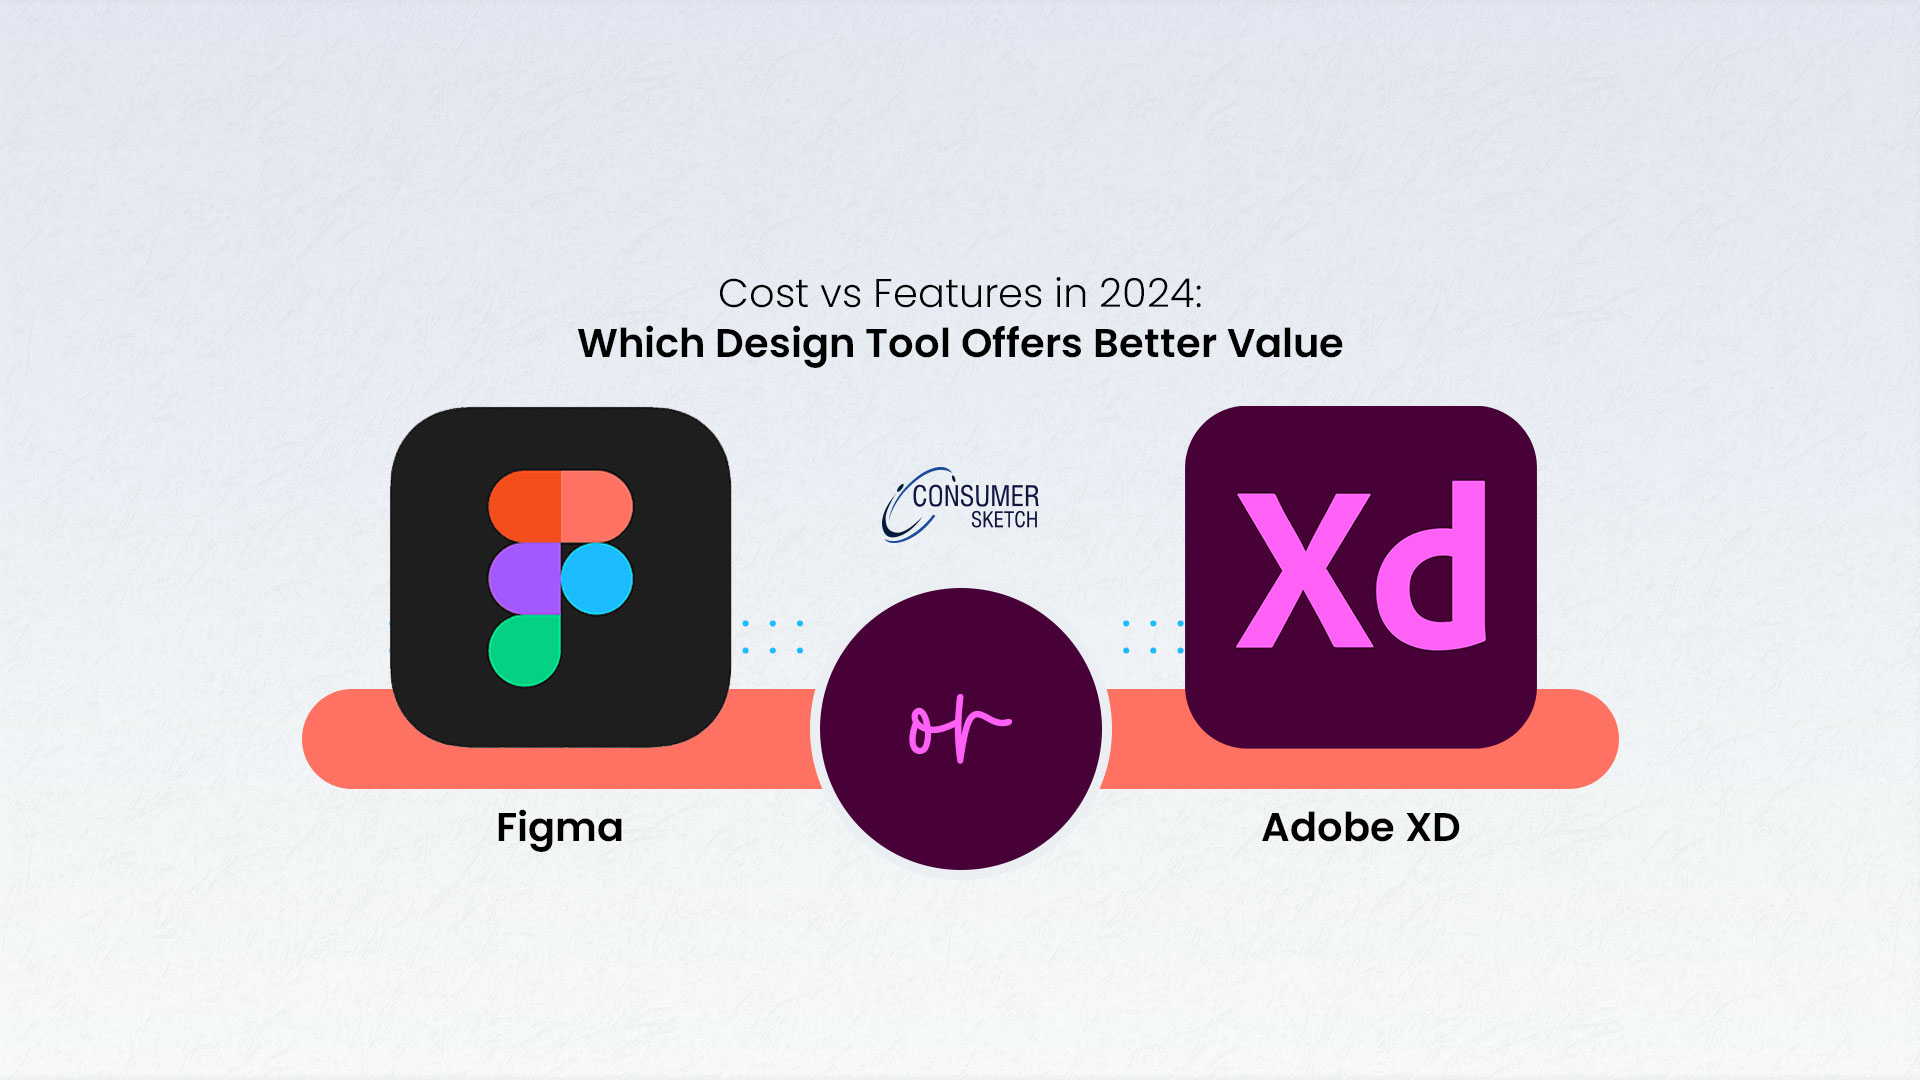 Cost vs Features in 2024: Which Design Tool Offers Better Value - Figma or Adobe XD?